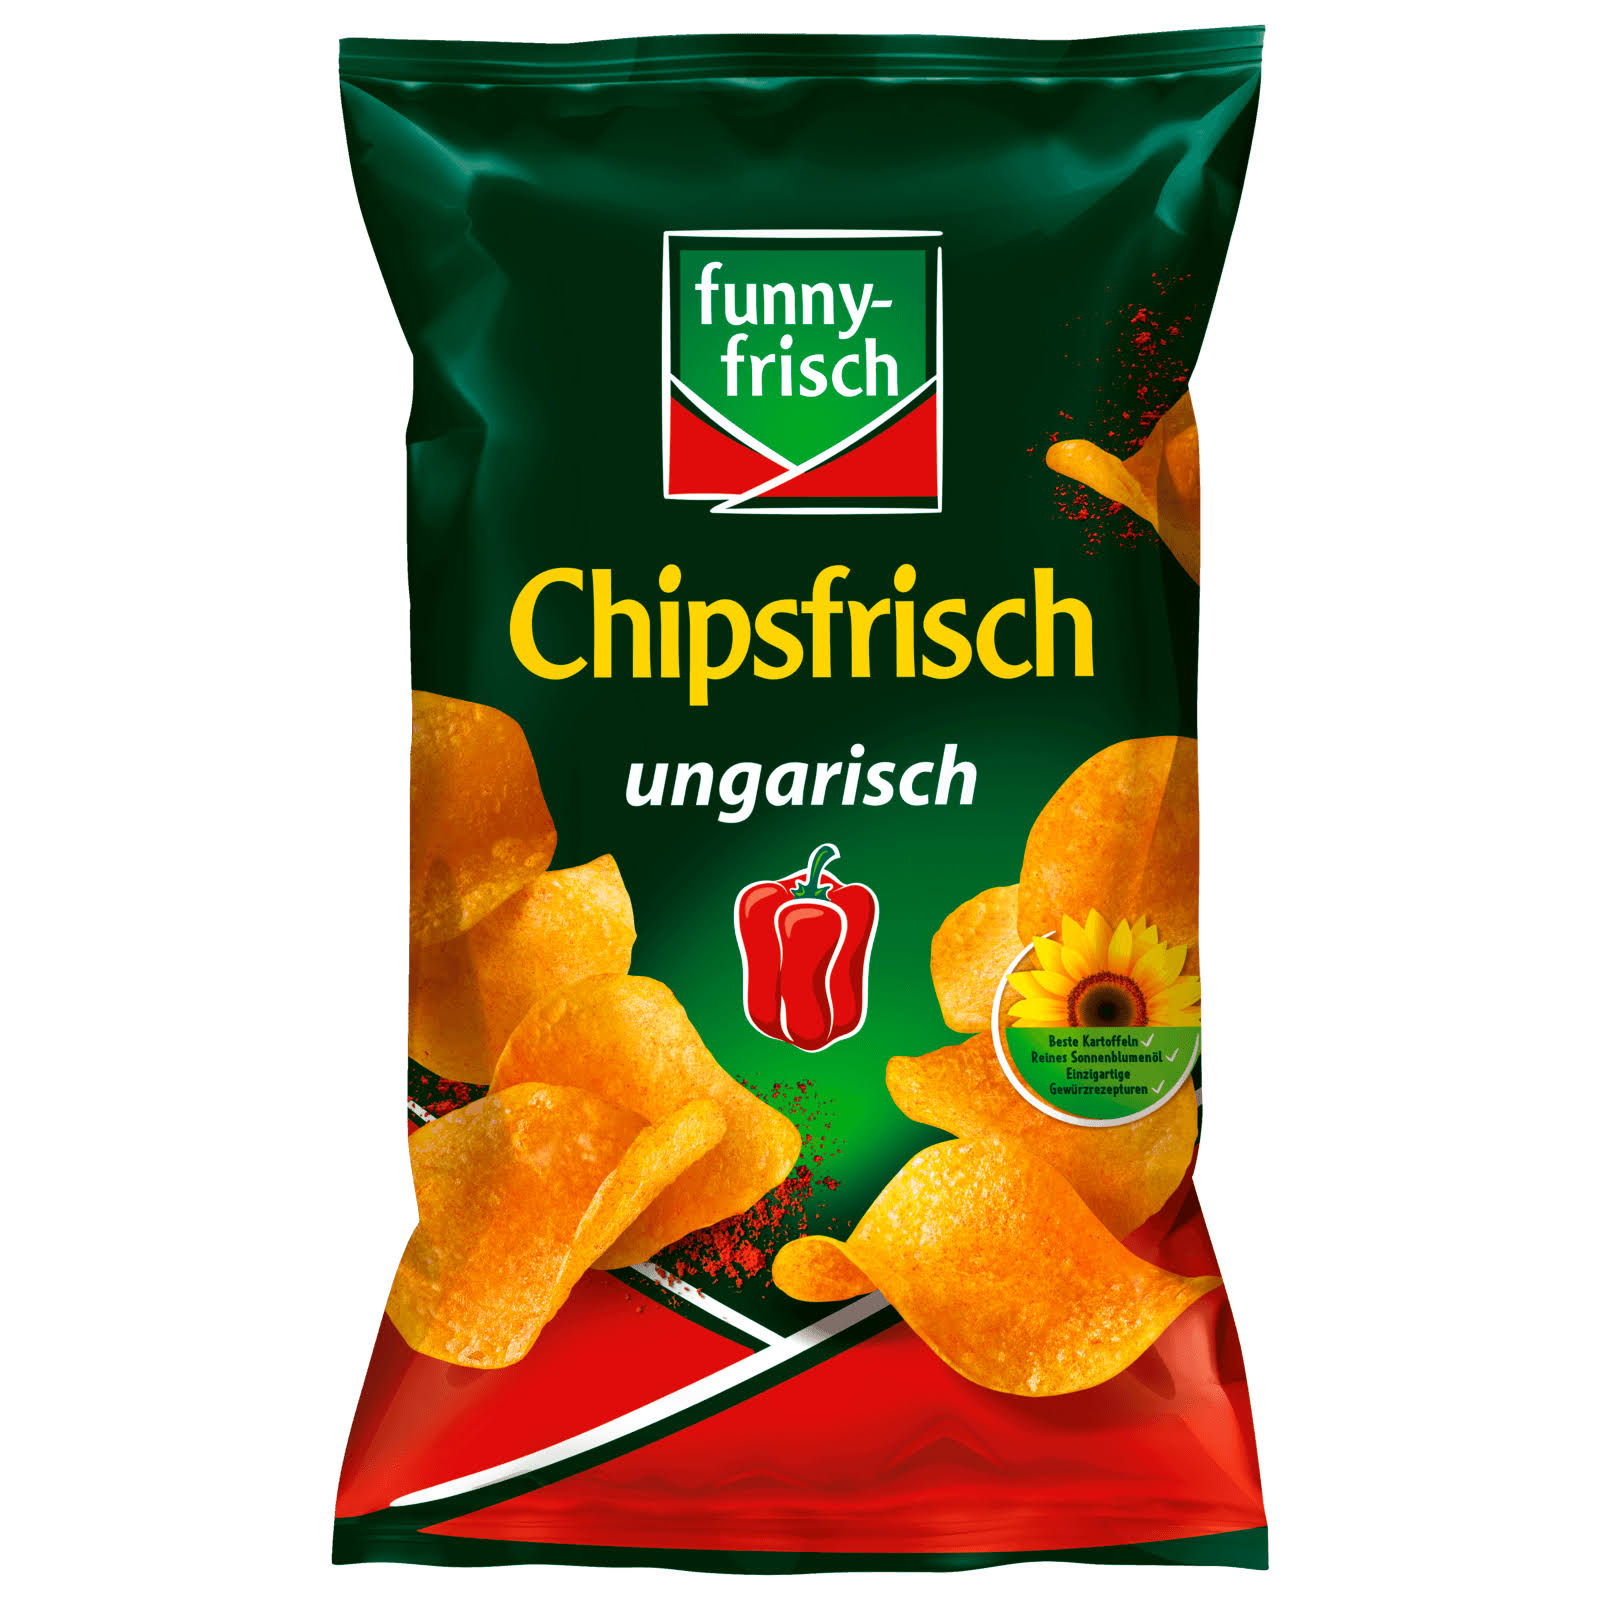 Funny Frisch Chipsfrisch Hungarian With Paprikawürzung Classic 150g